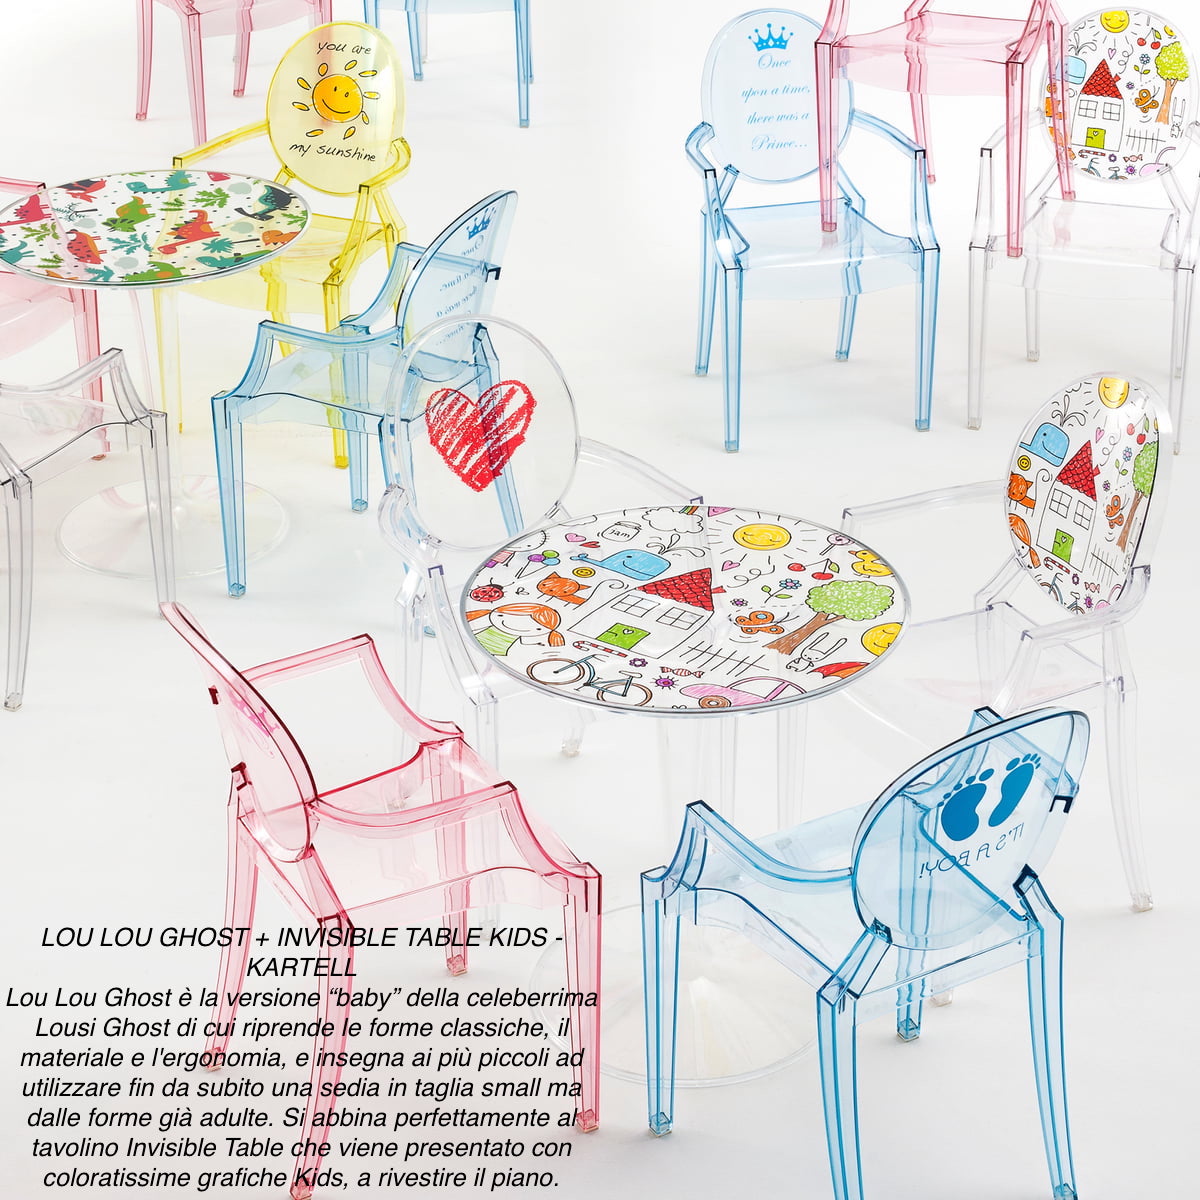 Lou lou ghost + invisible table kids - Kartell